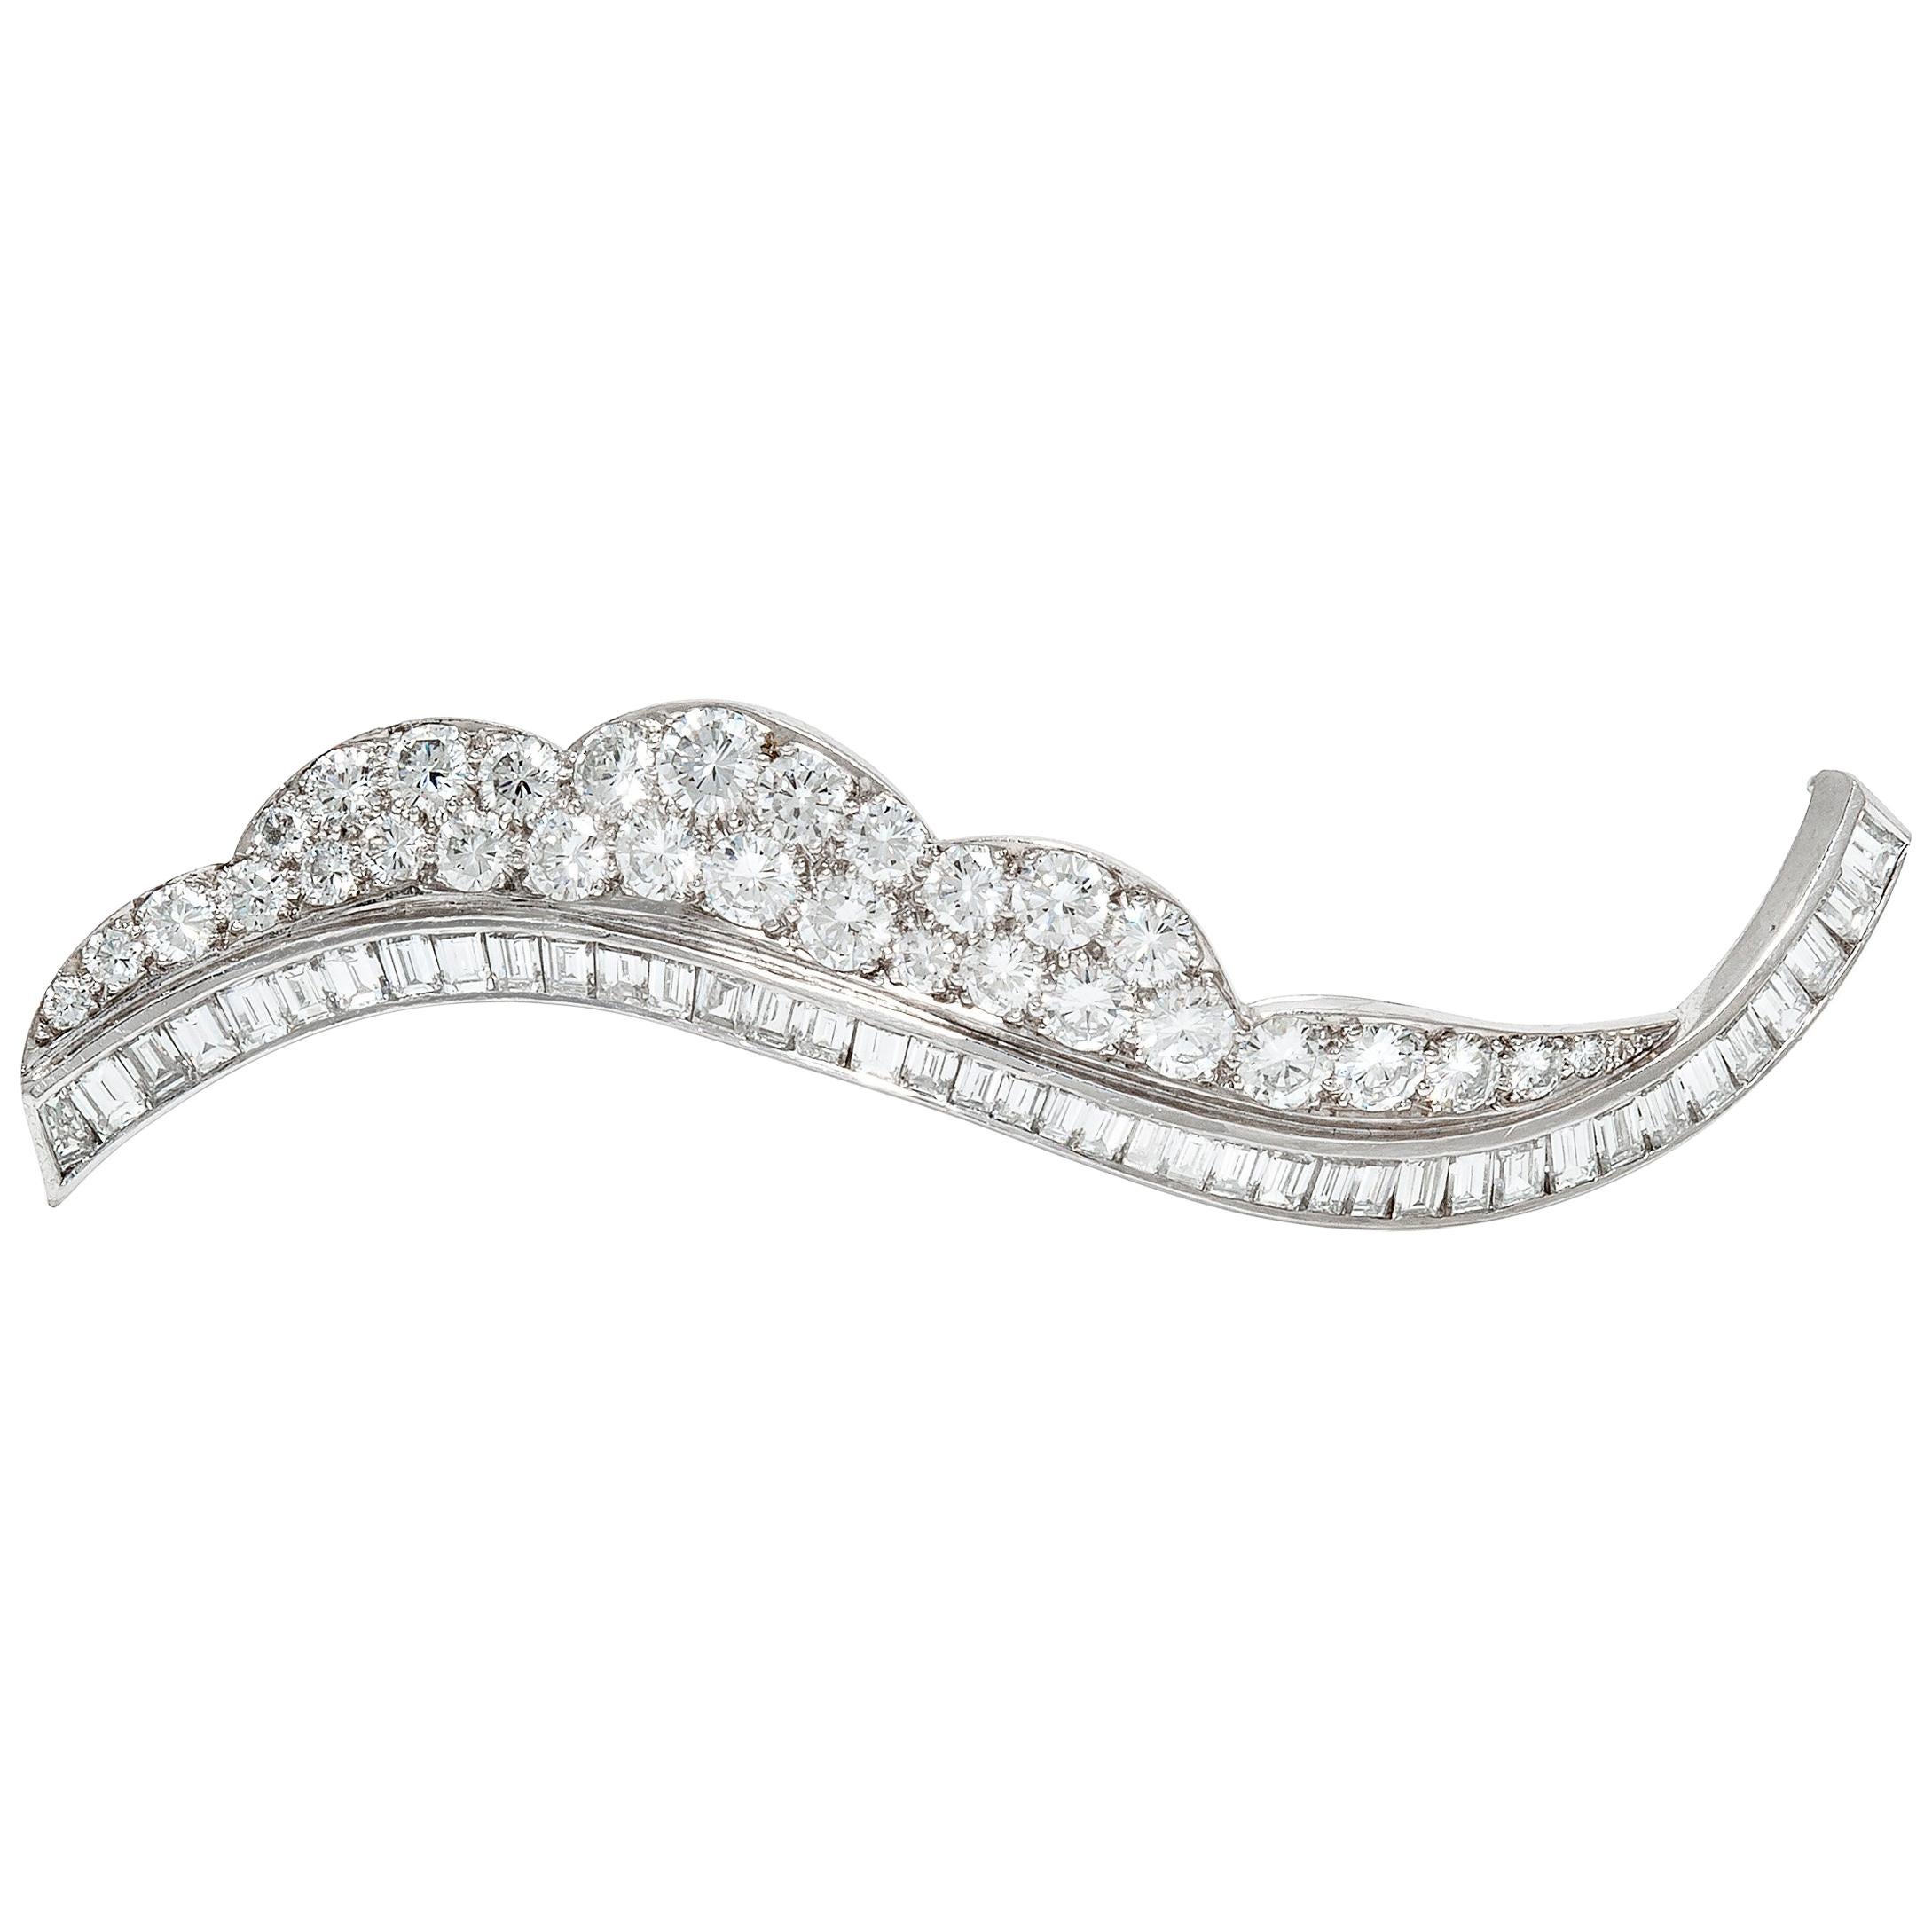 Platinum Brooch with Baguette Cut and Diamond